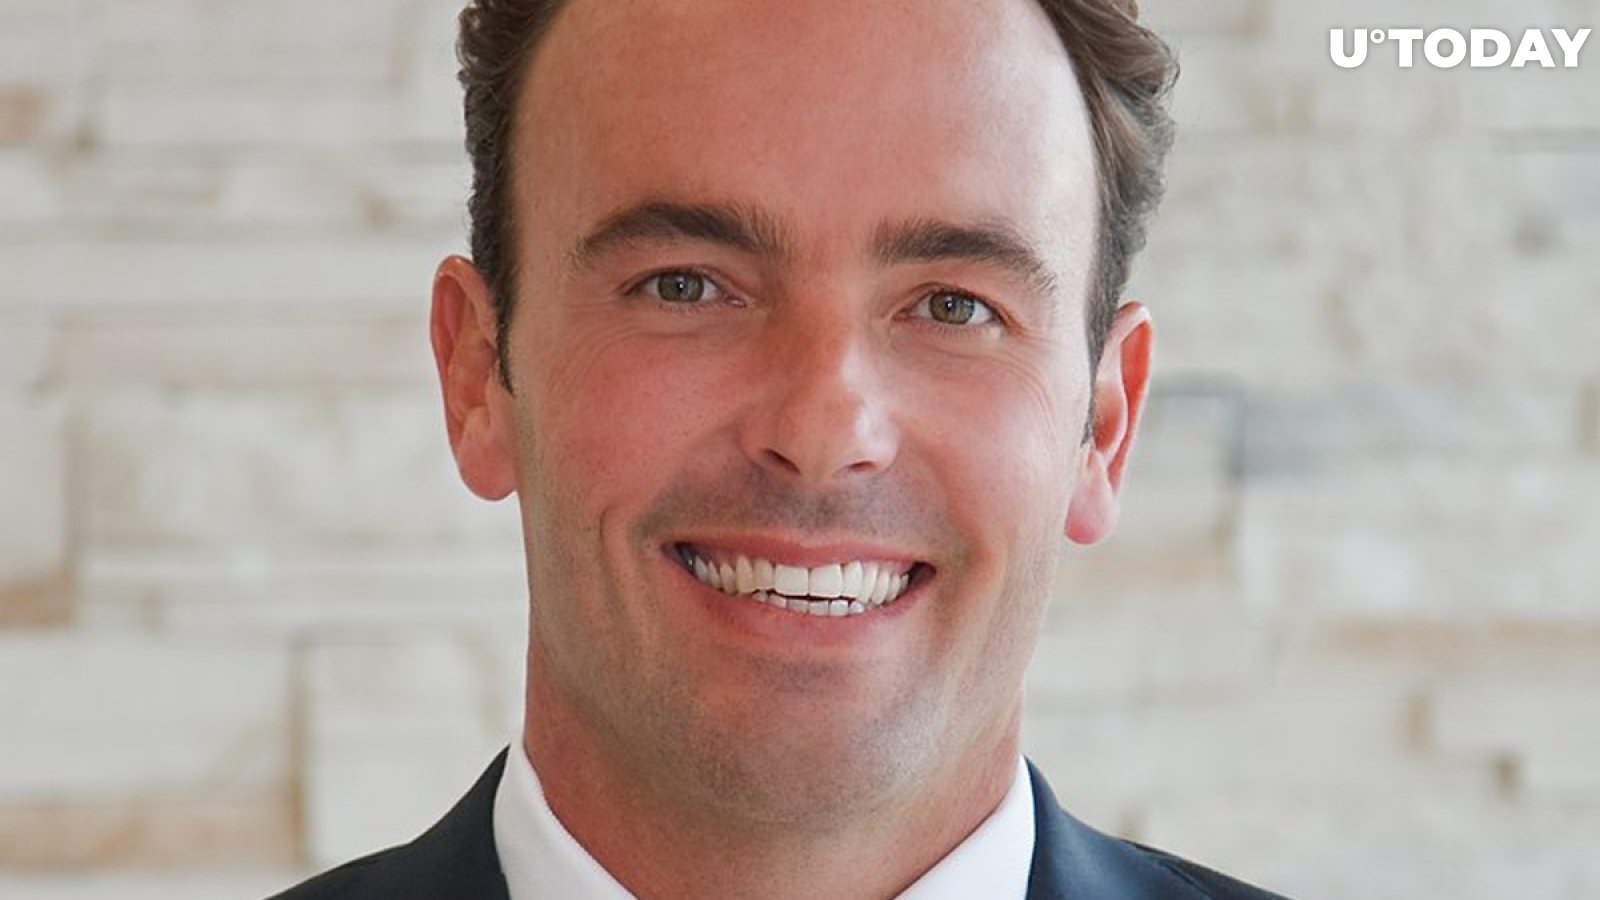 Bitcoin Ready to Make Explosive Move Together with Gold and Silver: Hedge Fund Manager Kyle Bass